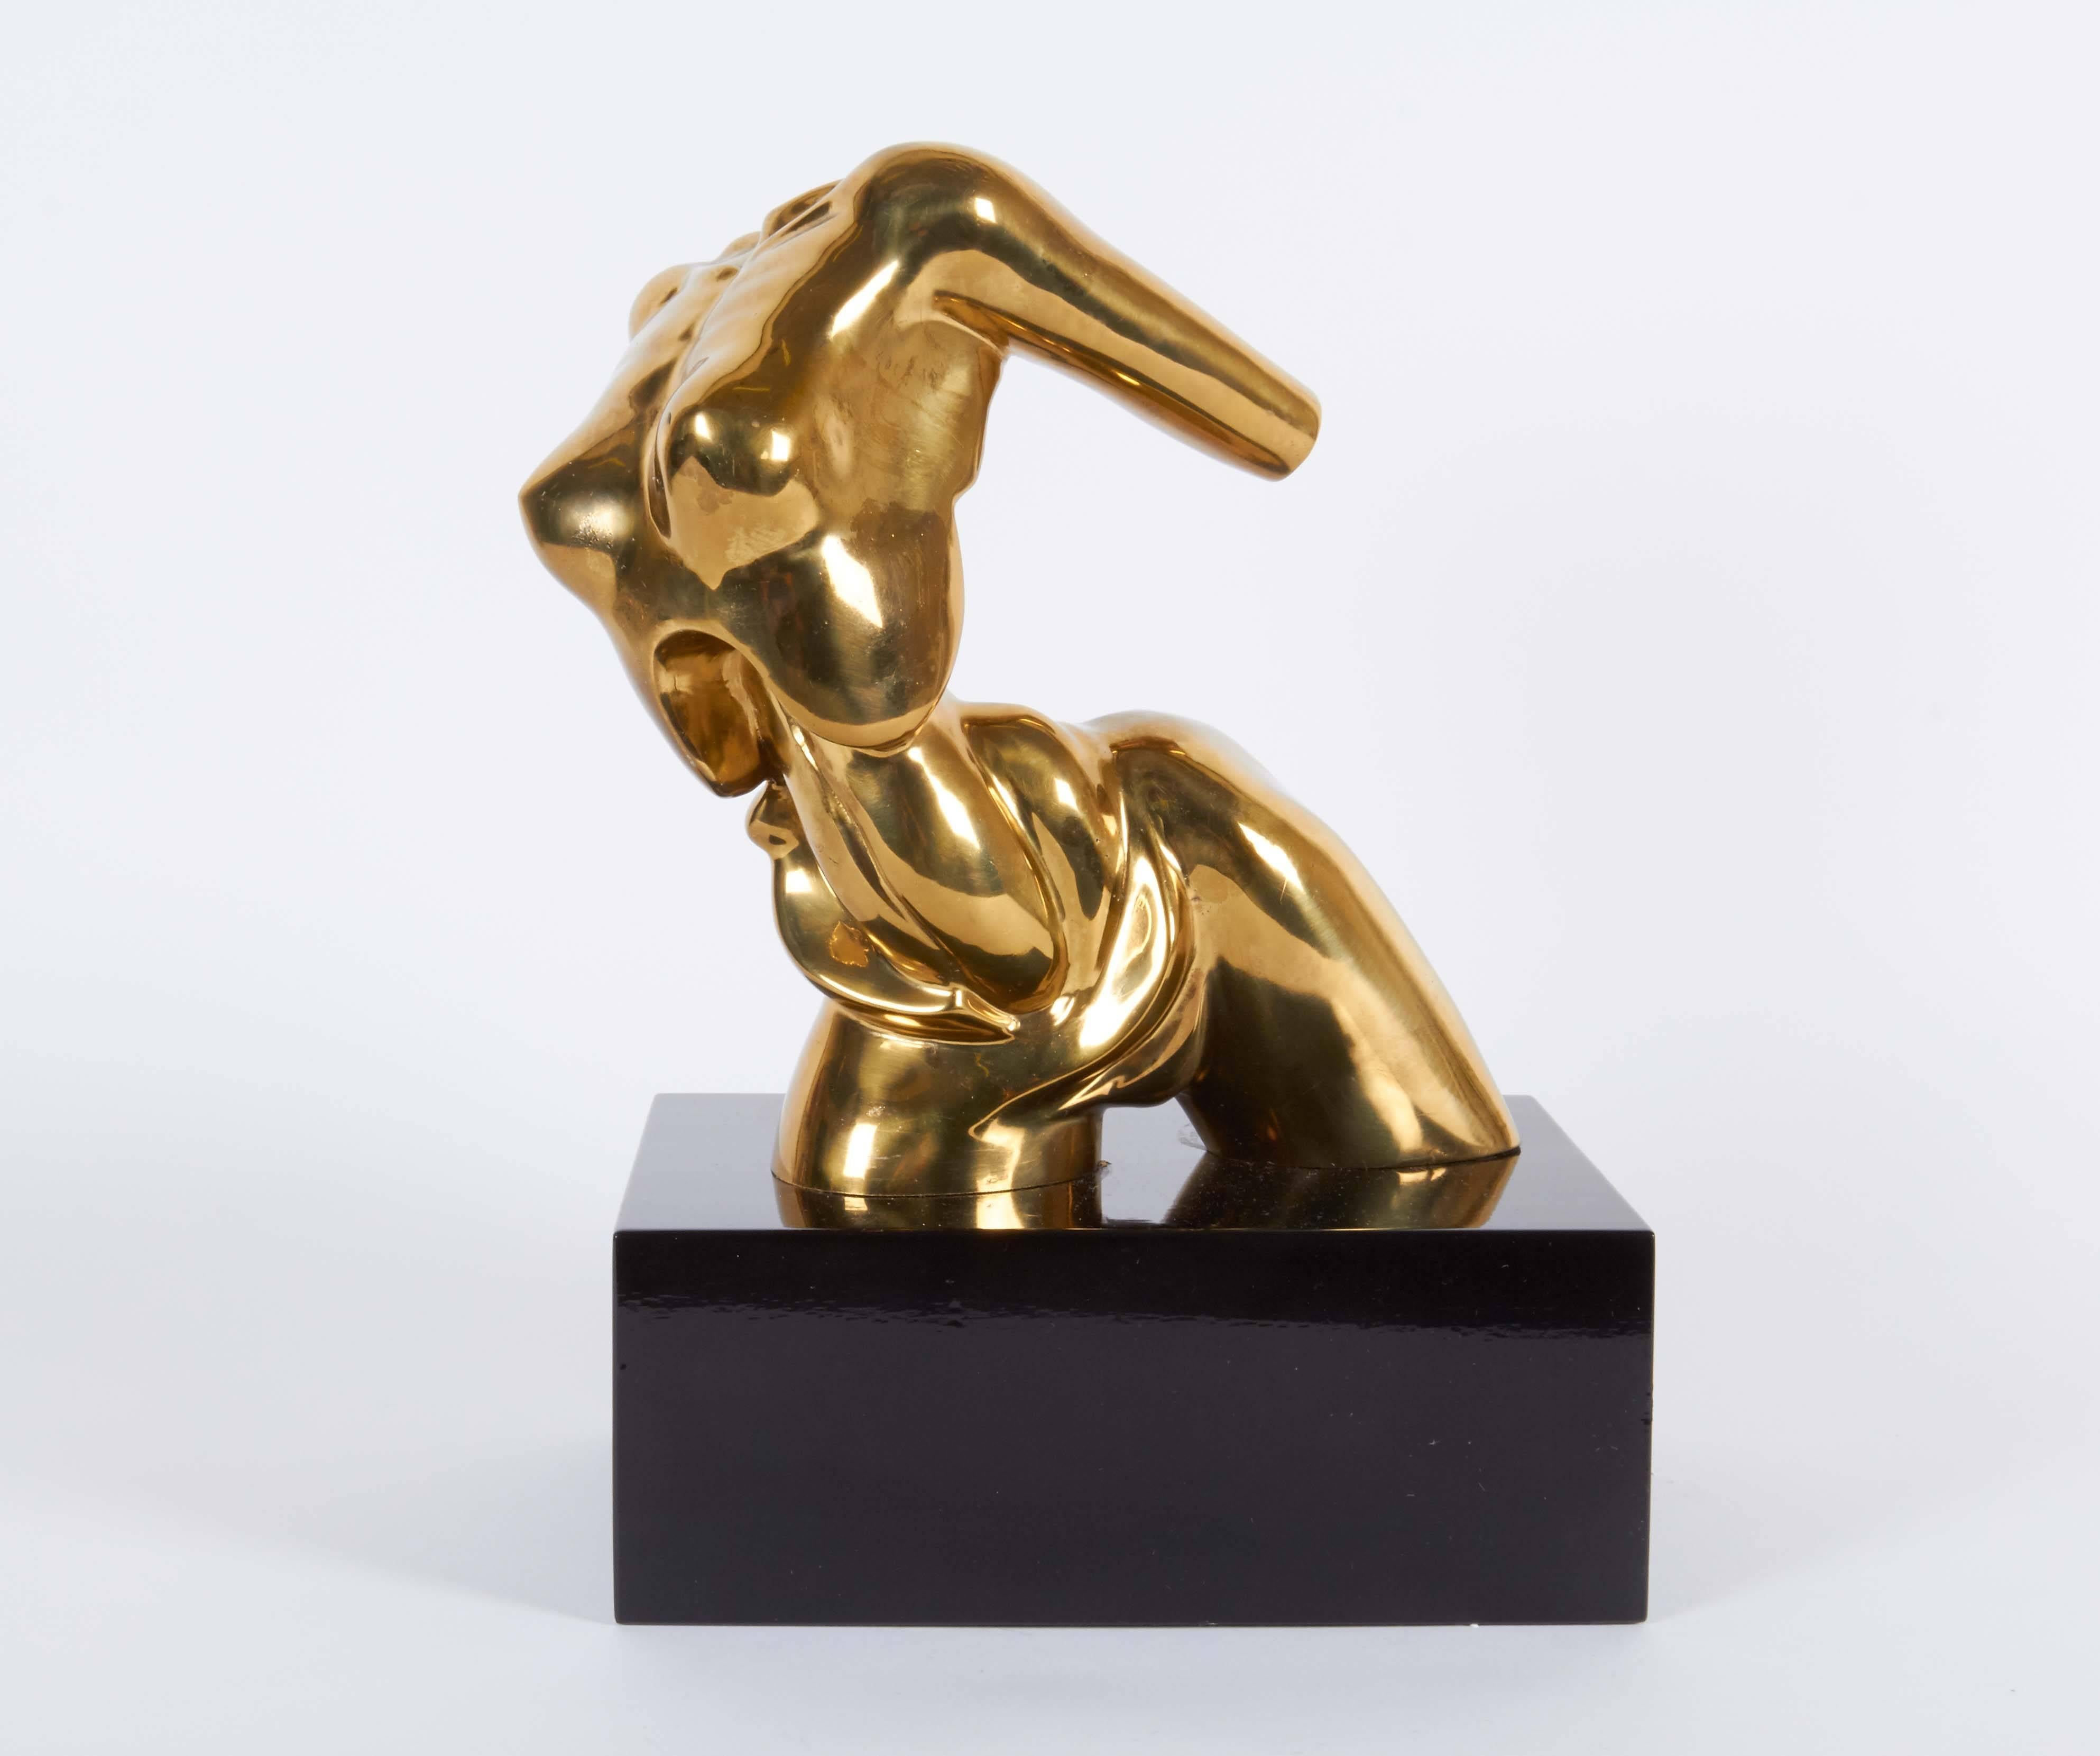 A modernist bronze sculpture by Hattakitkosol Somchai (Bangkok, 1934-2000), depicting a female torso in mid-motion, evoking the Futurist style, mounted on a black lacquered wood base. Markings include [Somchai] and edition number [18/1000] to the